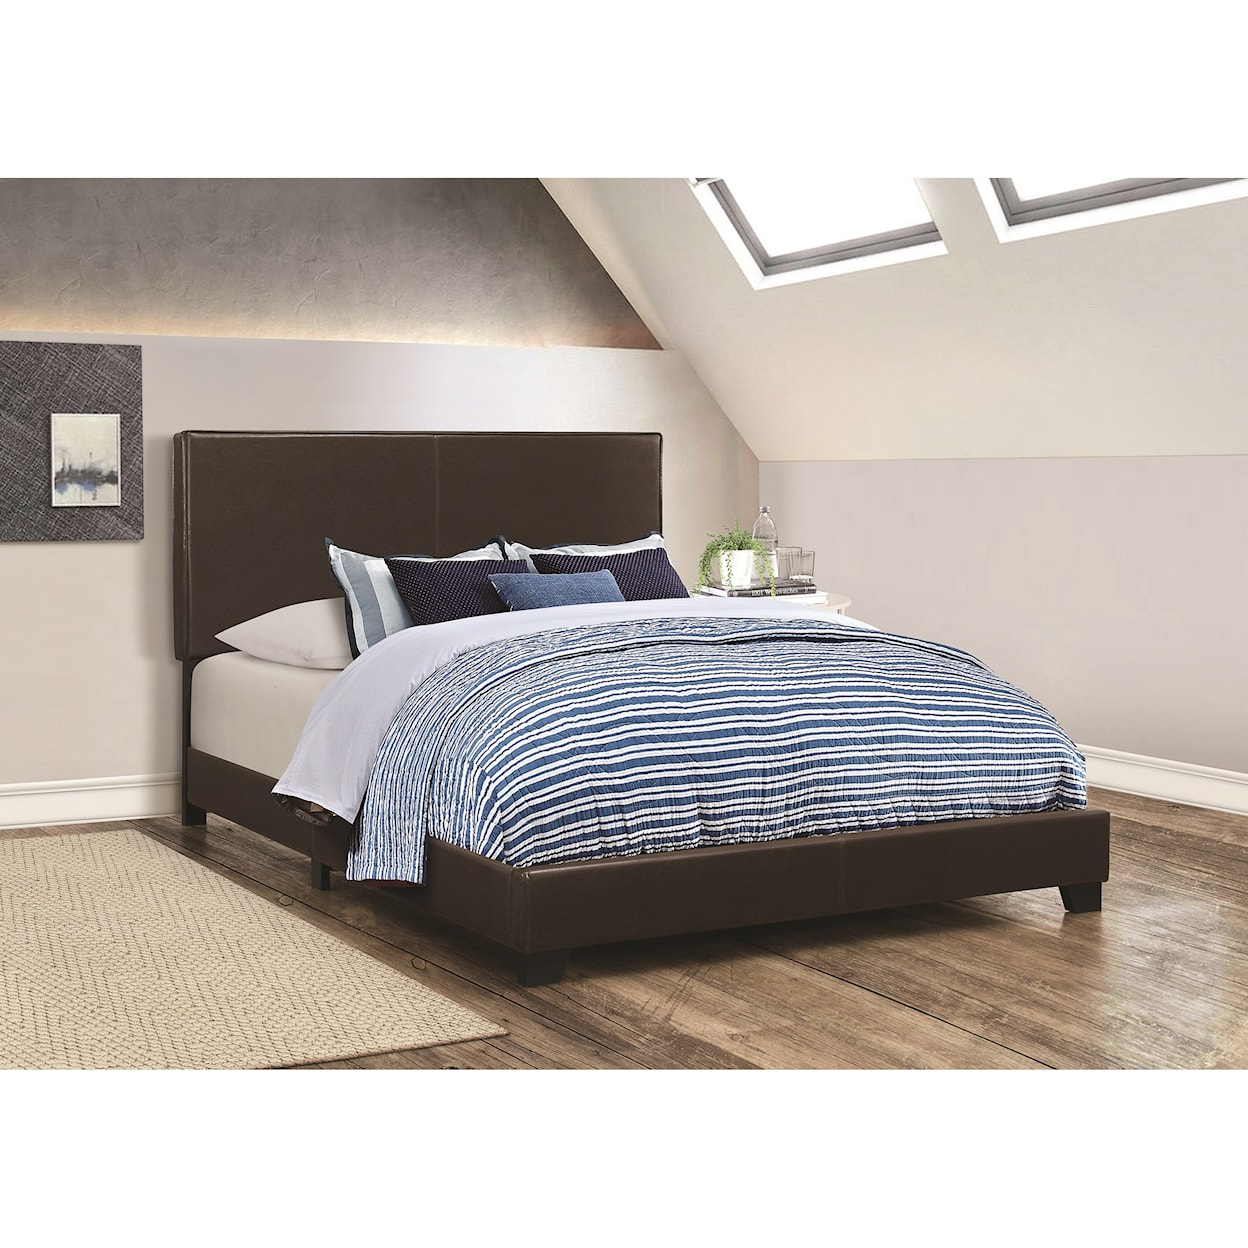 Coaster Dorian Brown BROWN BYCAST FULL BED |